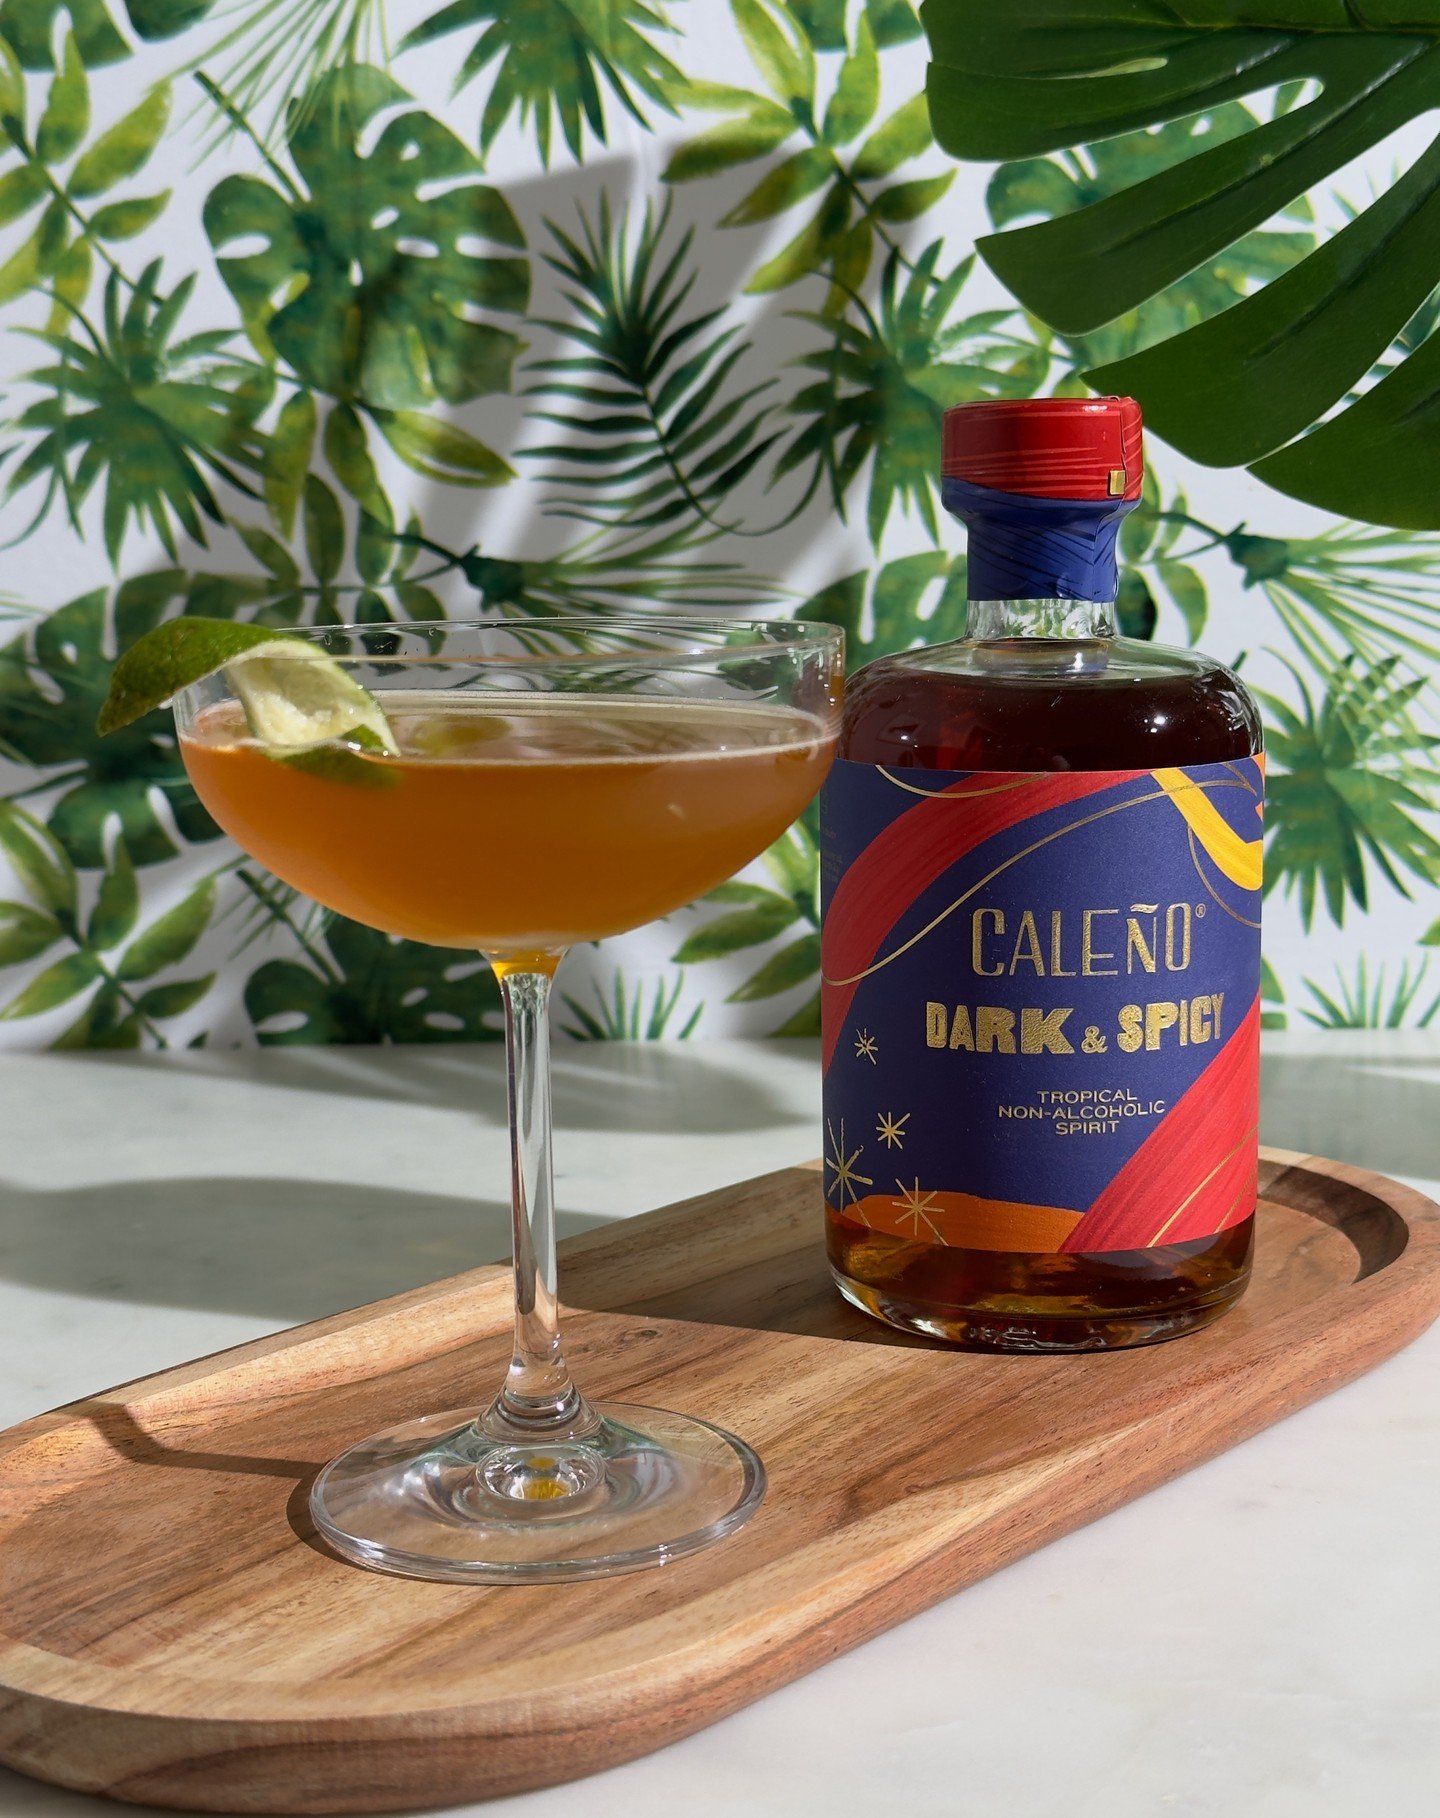 Caleno is a new(ish) non-alcoholic rum style spirit that I had so much fun making a classic daiquiri with!! Recipes for this and more Caleno options at somegoodcleanfun.com #nonalcoholicdrinks #sobercurious #mocktails #mocktailrecipe